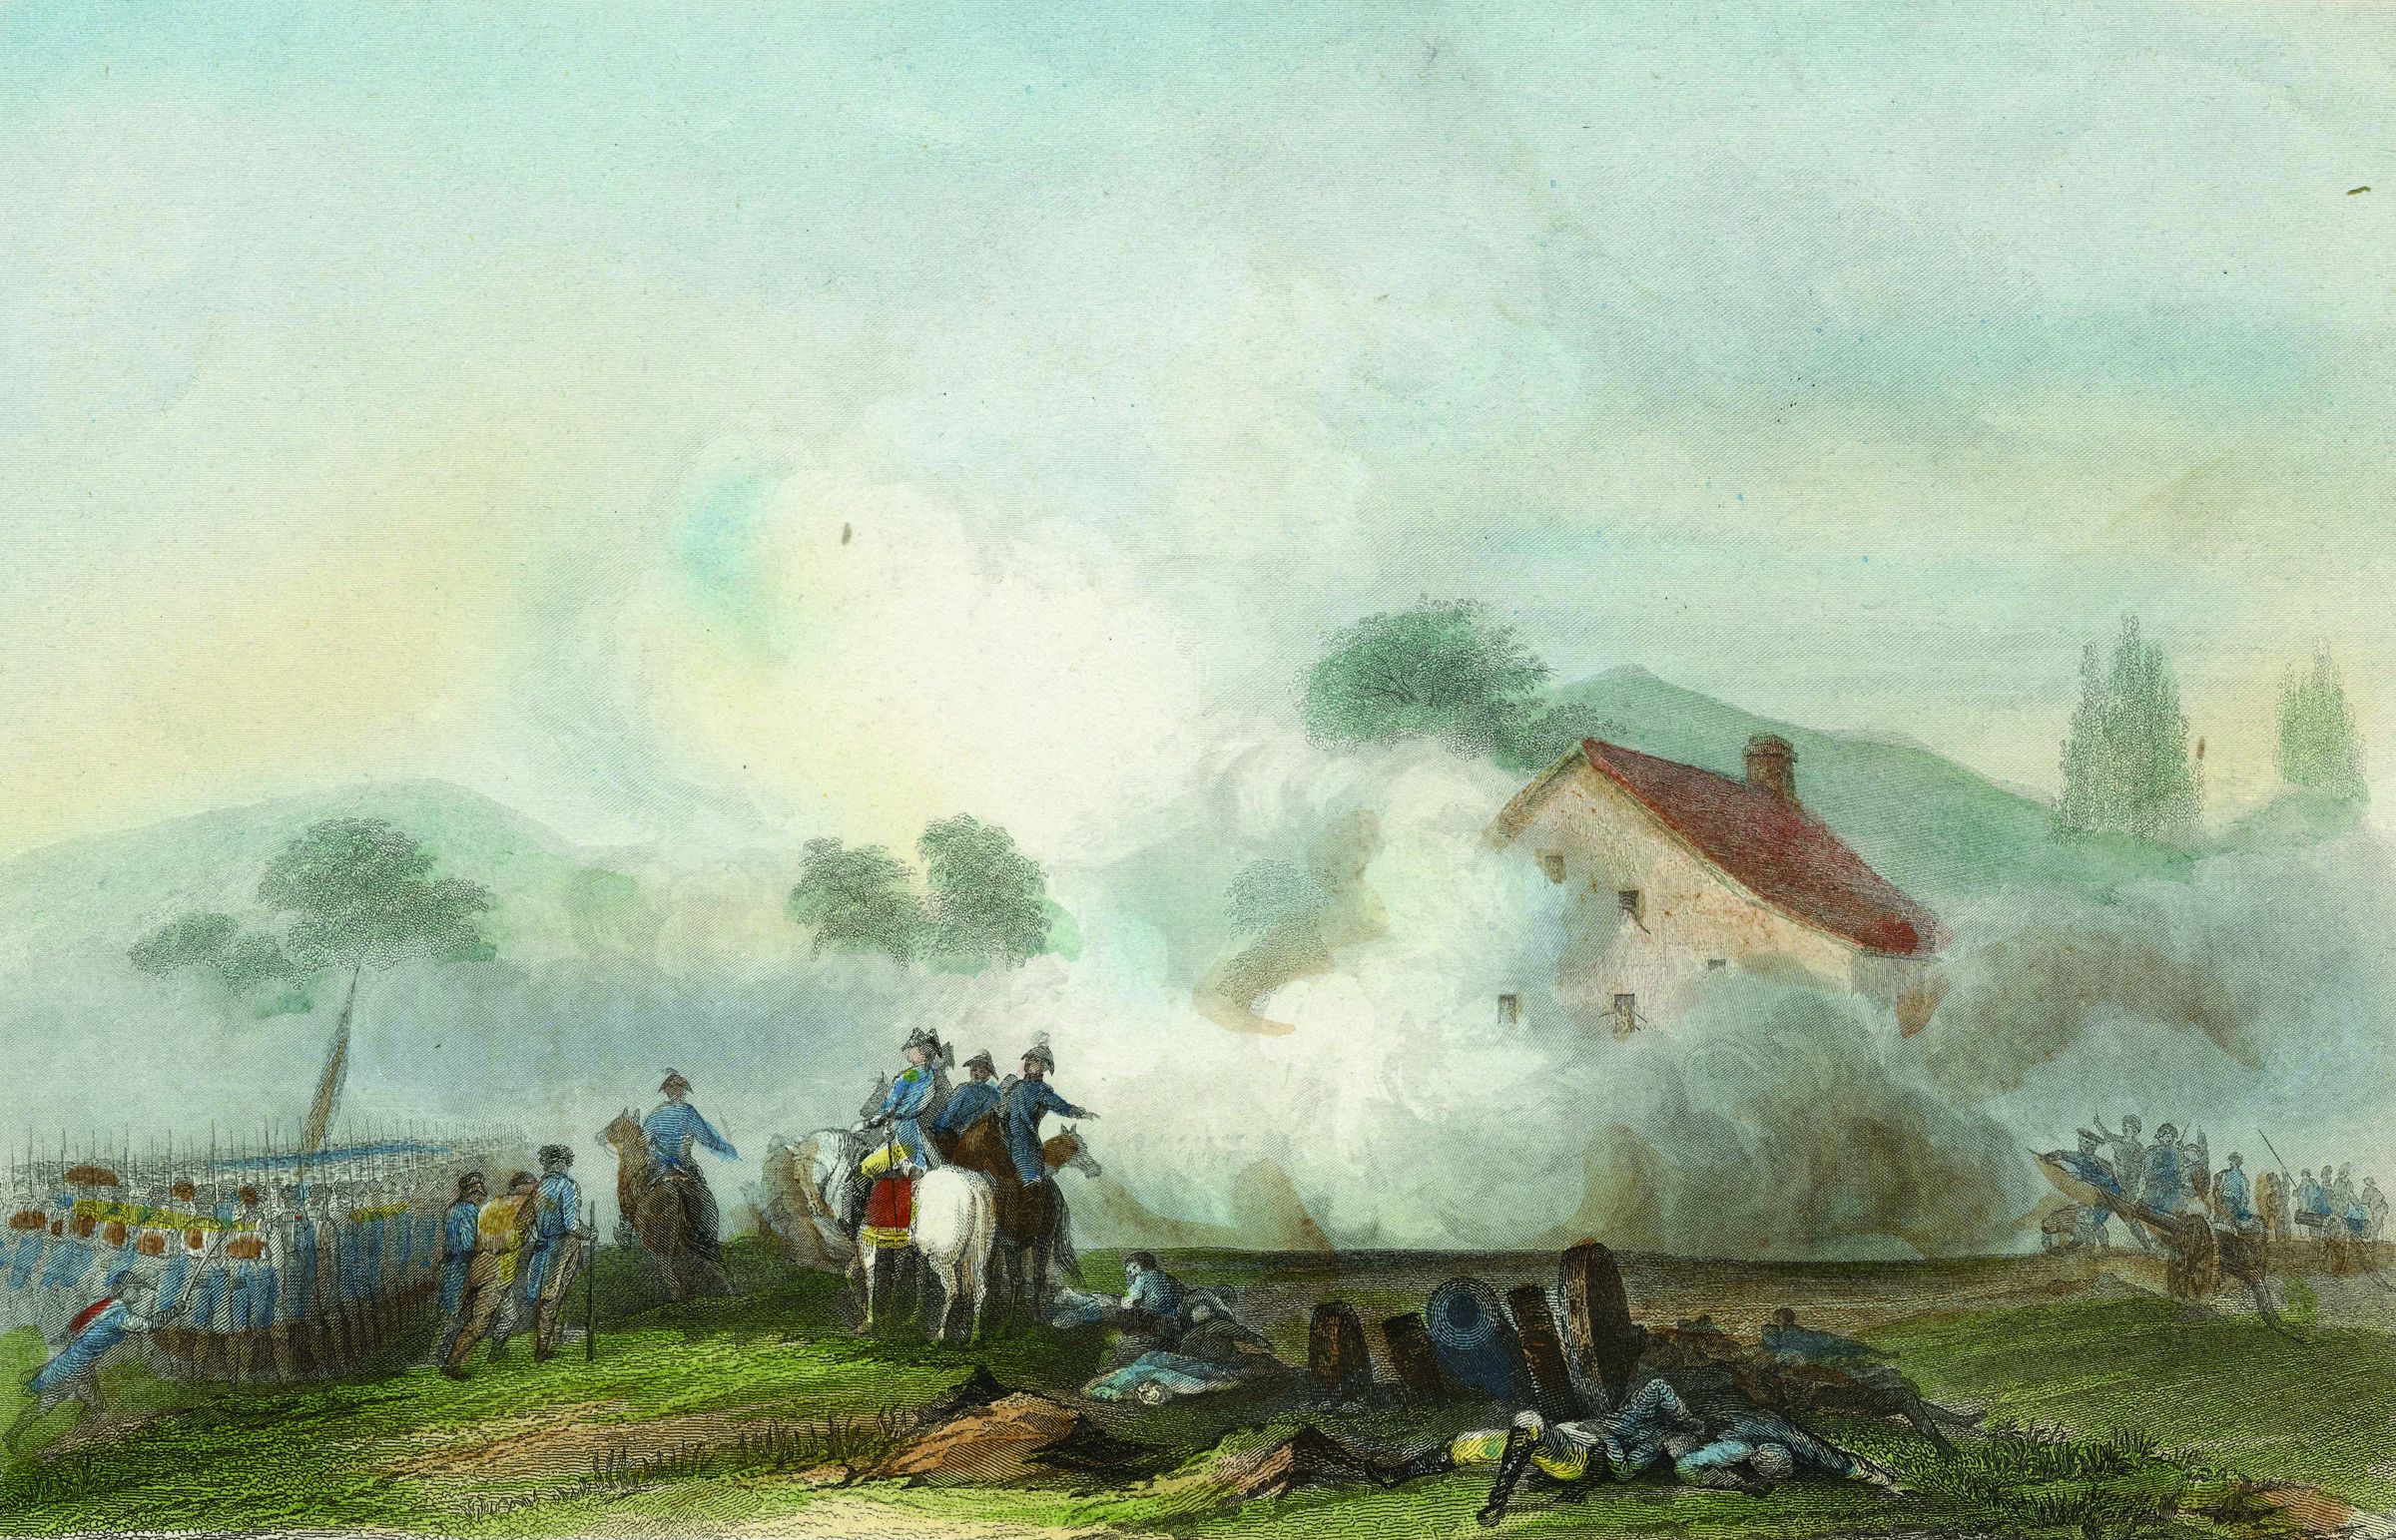 American artillery continues to fire on the Patrick Roche mansion, while implausibly well-aligned troops march by on the left. In fact, many Continental troops broke away to pillage the British camp. 